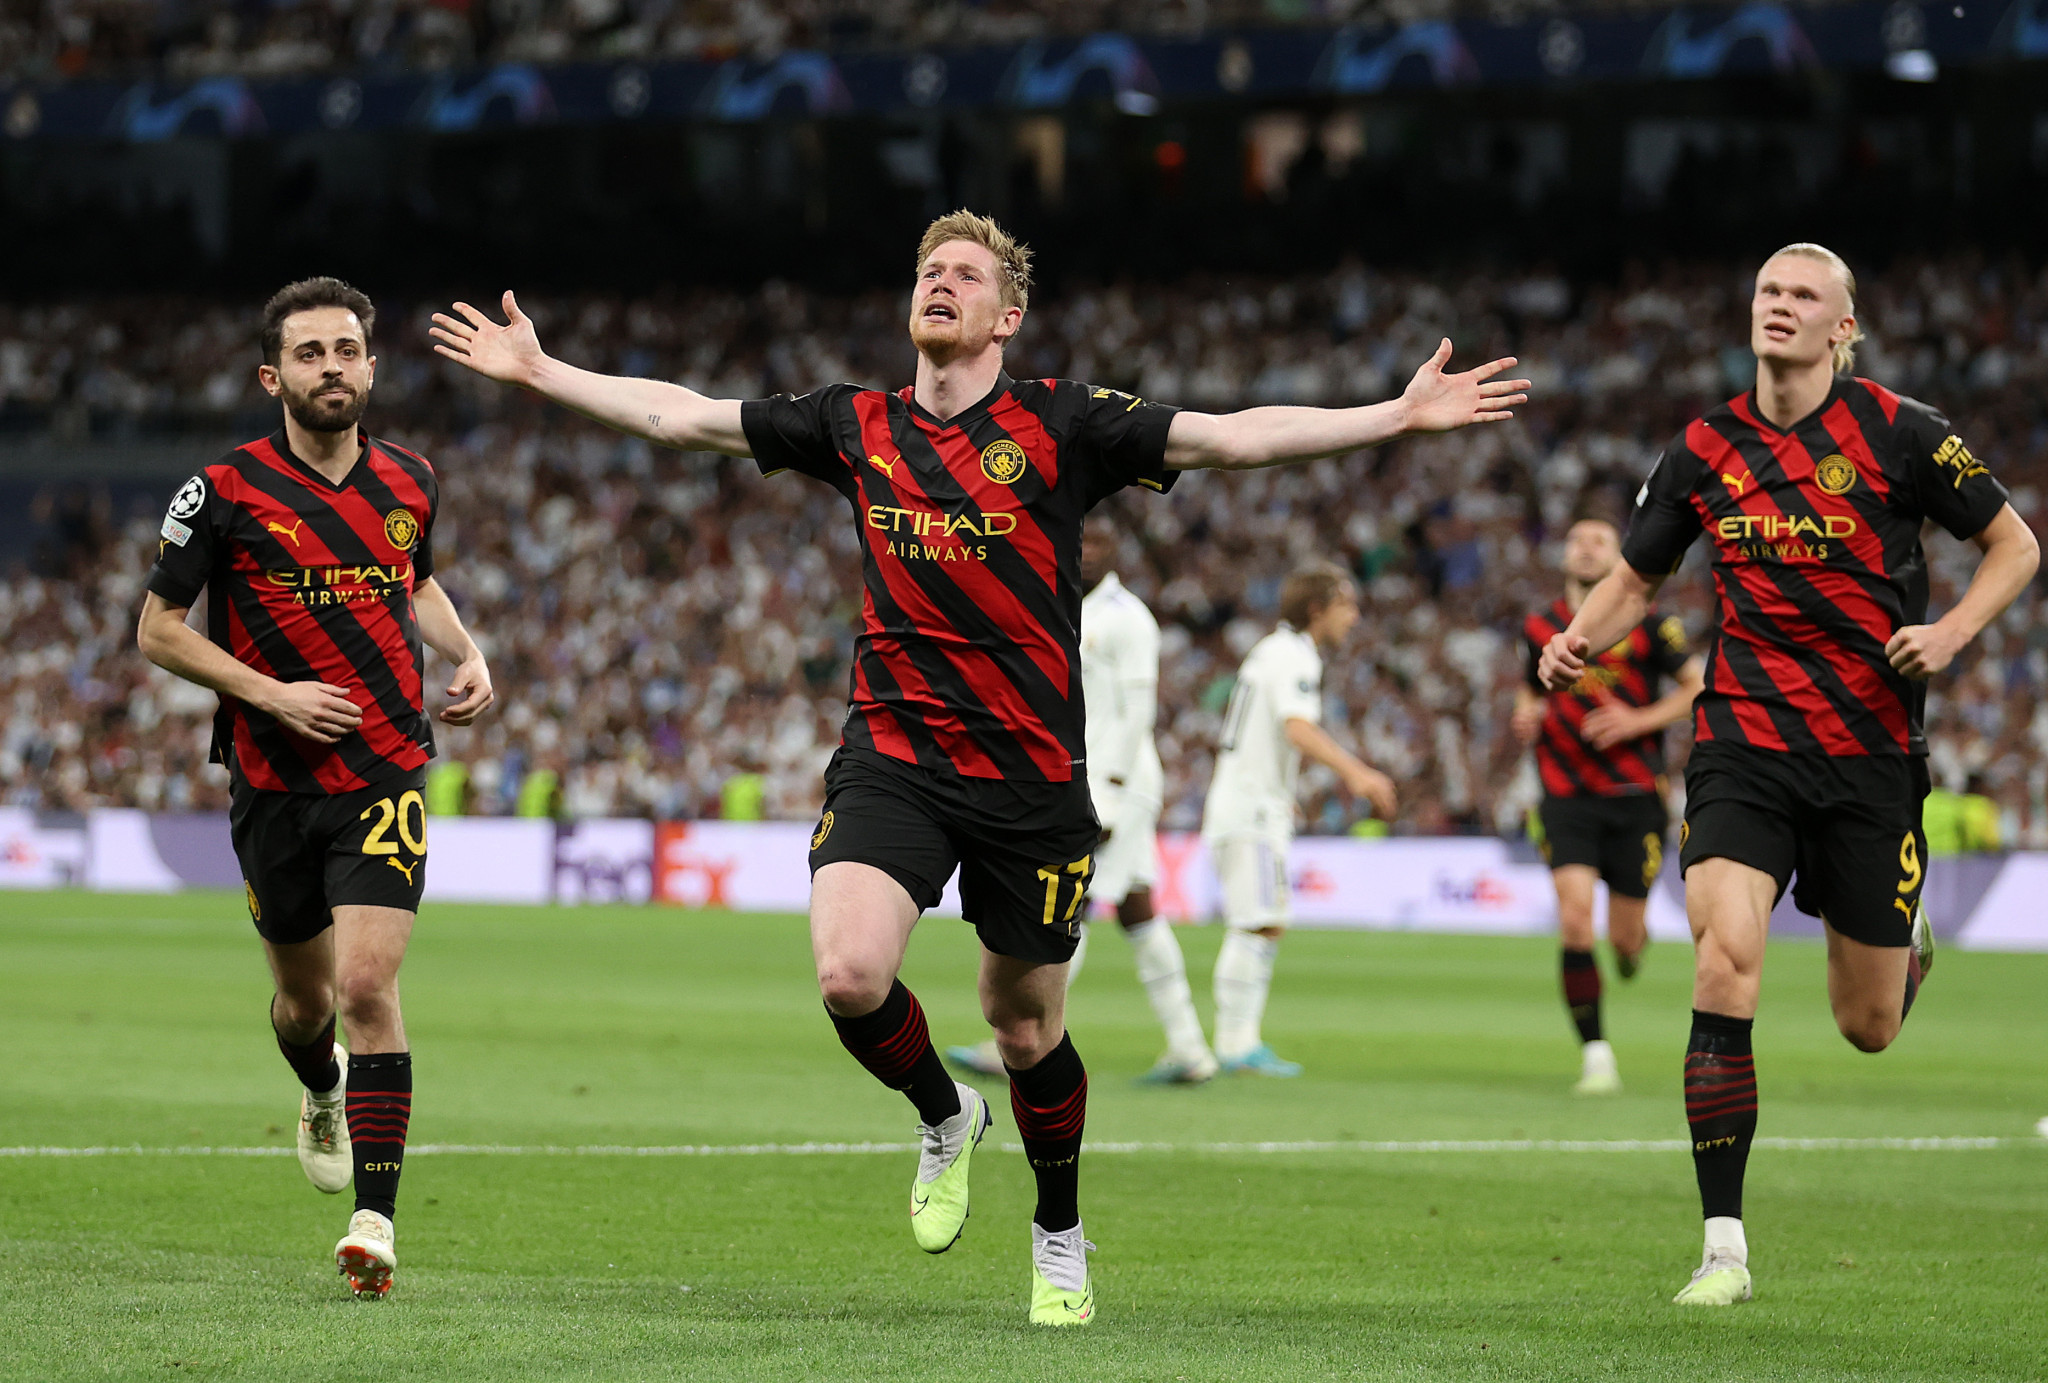 Kevin De Bruyne's goal gave Manchester City a draw in the first leg of their Champions League semi-final against Real Madrid as English clubs chase more European glory ©Getty Images